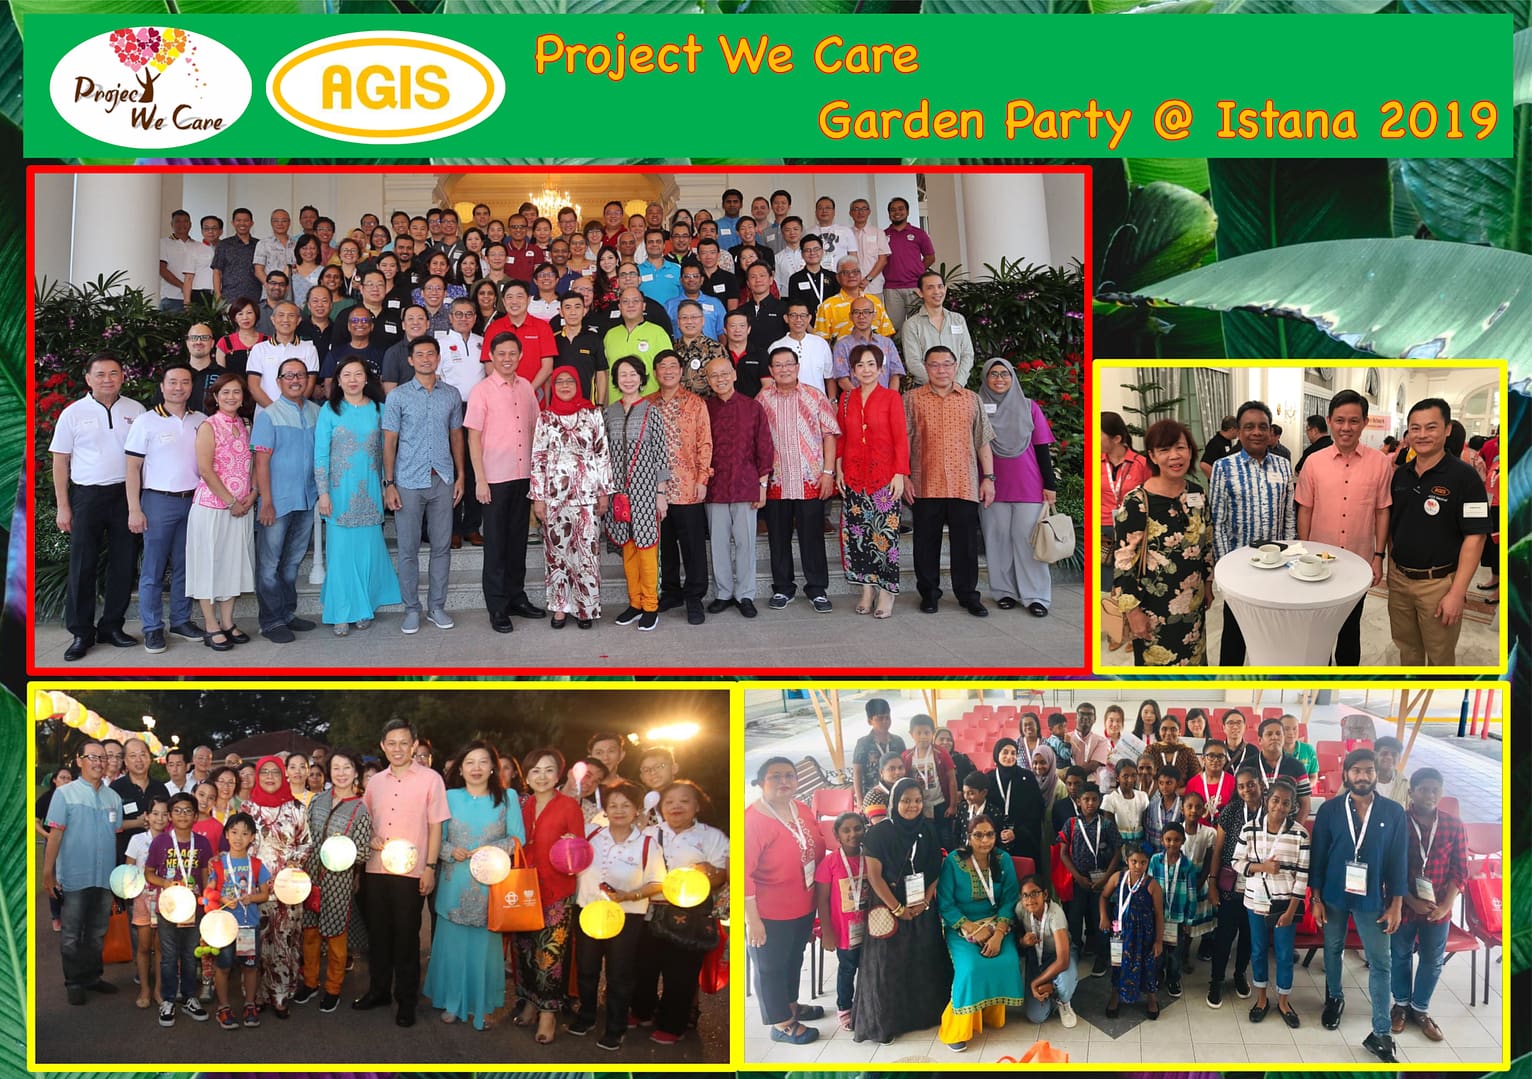 PA project we care